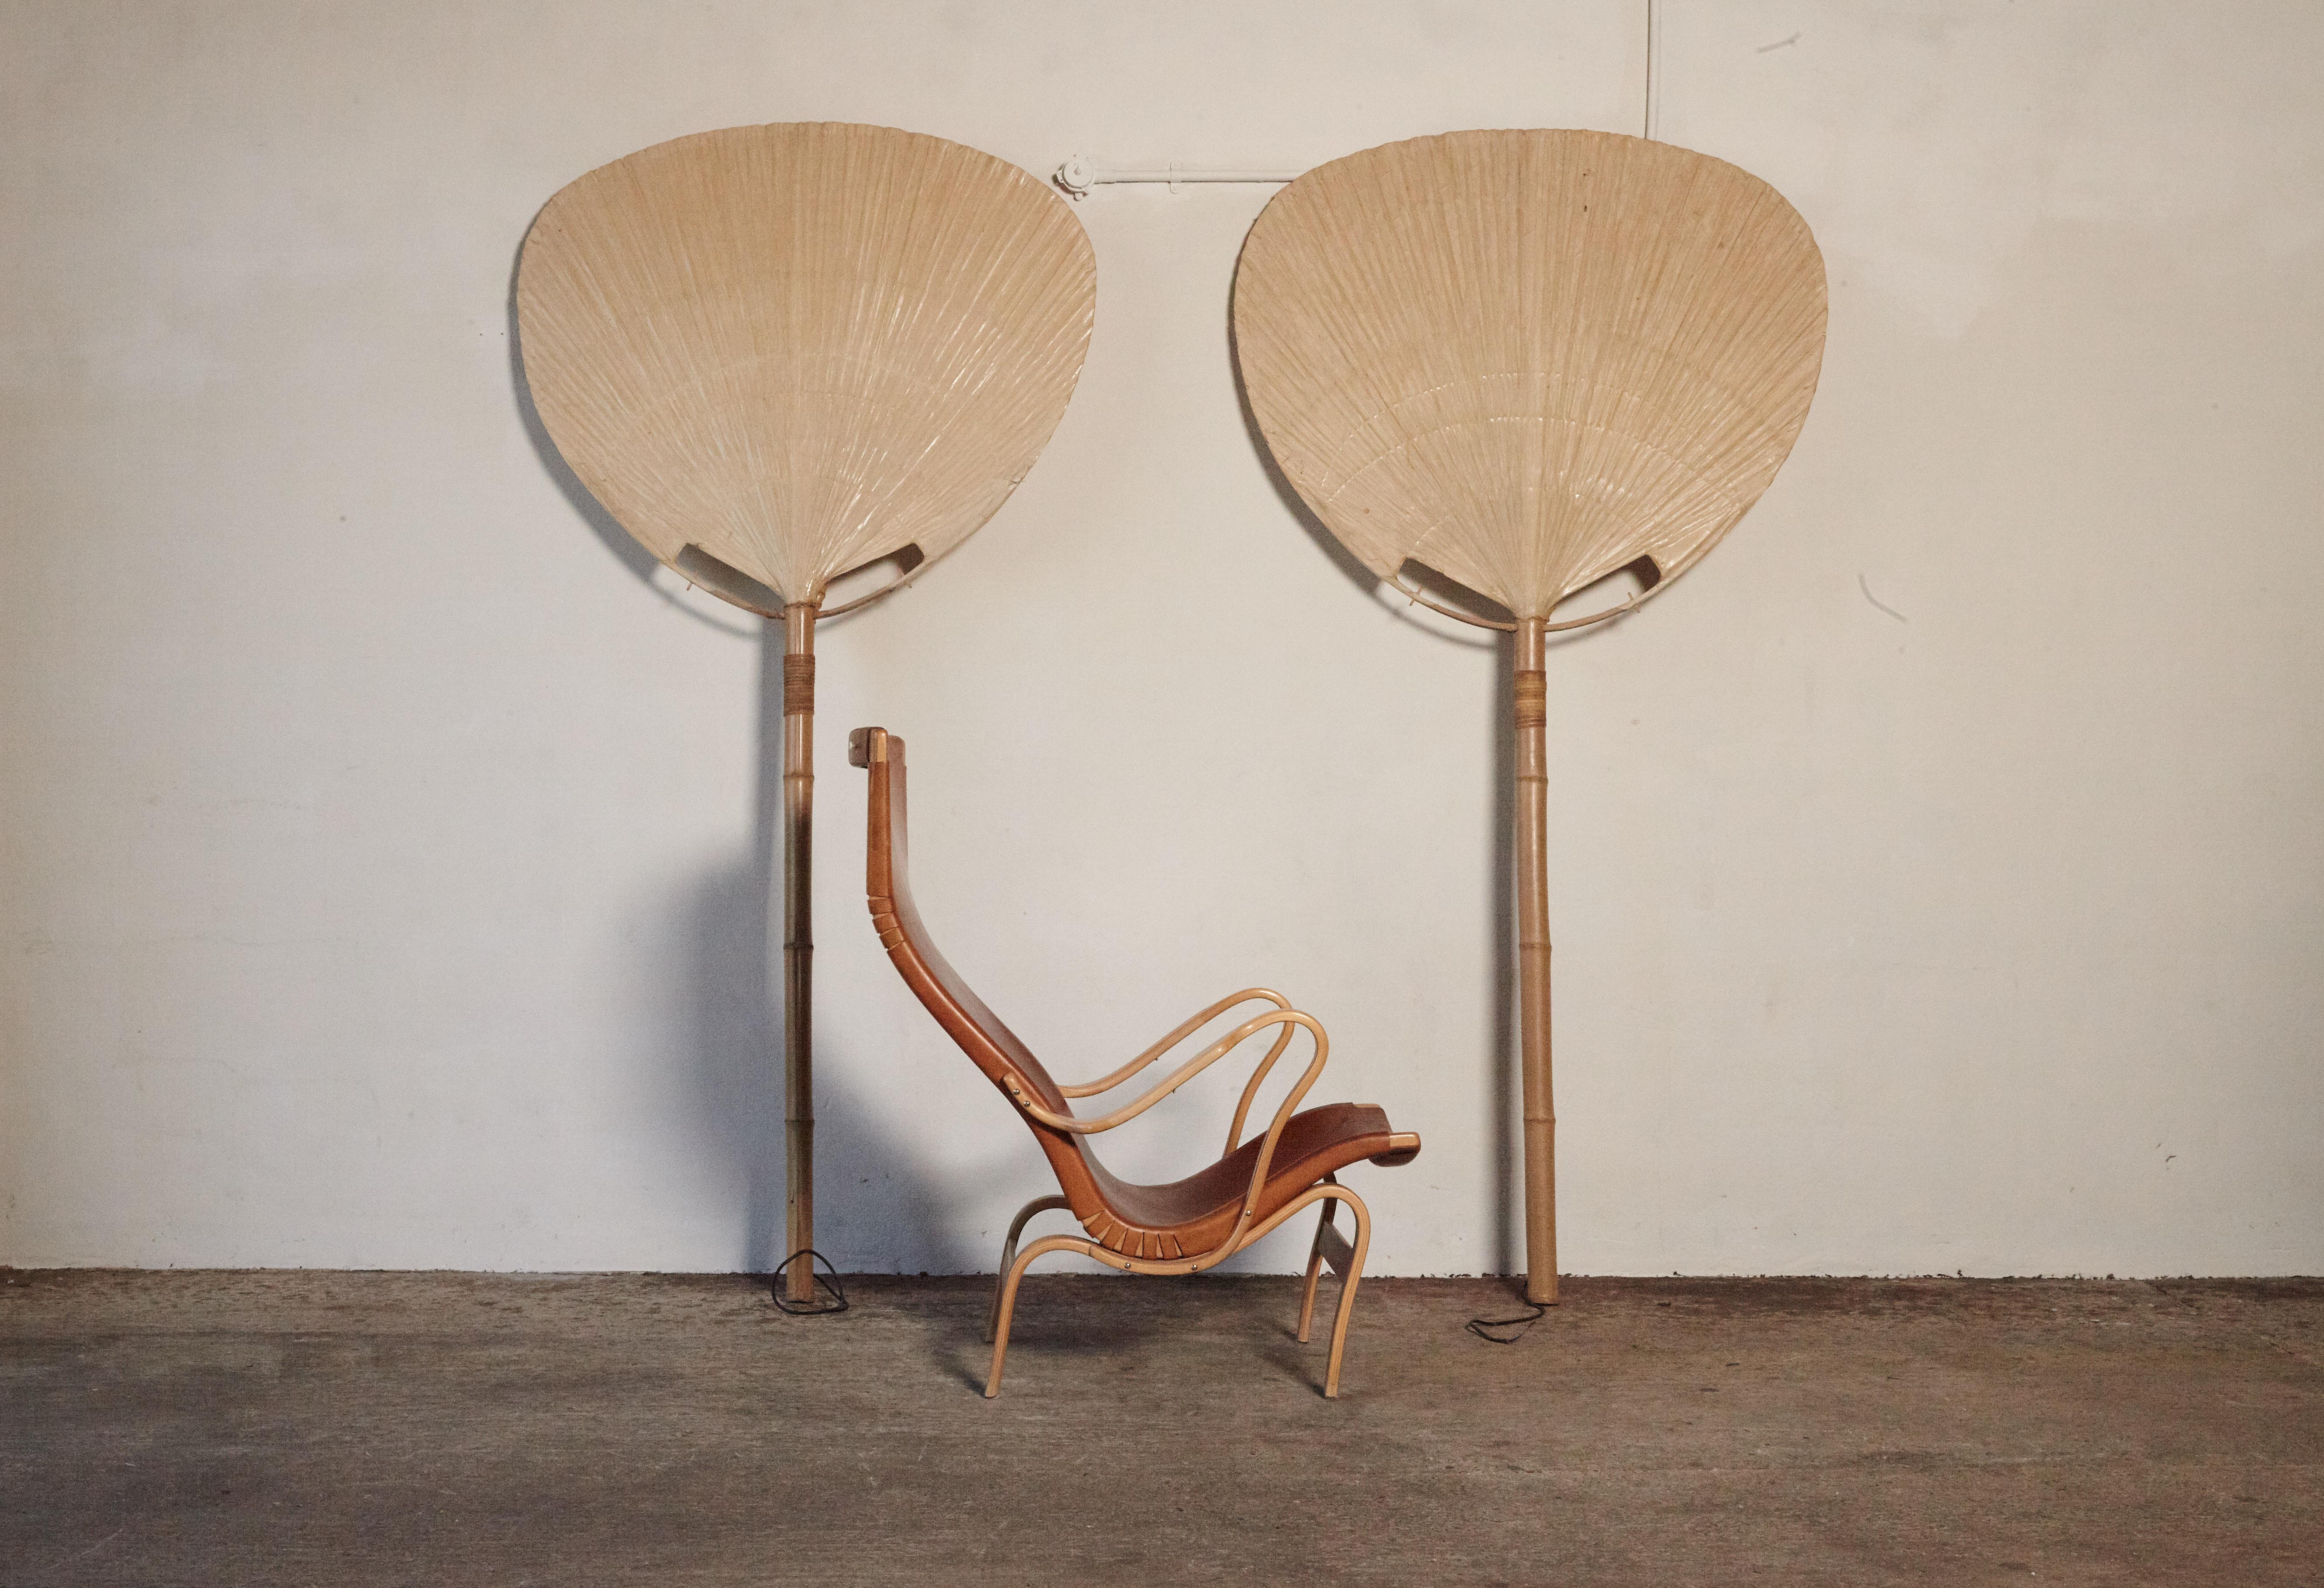 Extremely rare pair of Uchiwa floor lamps, designed by Ingo Maurer for M design, Germany, in the 1970s. Handmade from bamboo, wicker and Japanese rice paper. The lamp is floor and wall leaning or can be wall-mounted. There are 3 bulb sockets on each